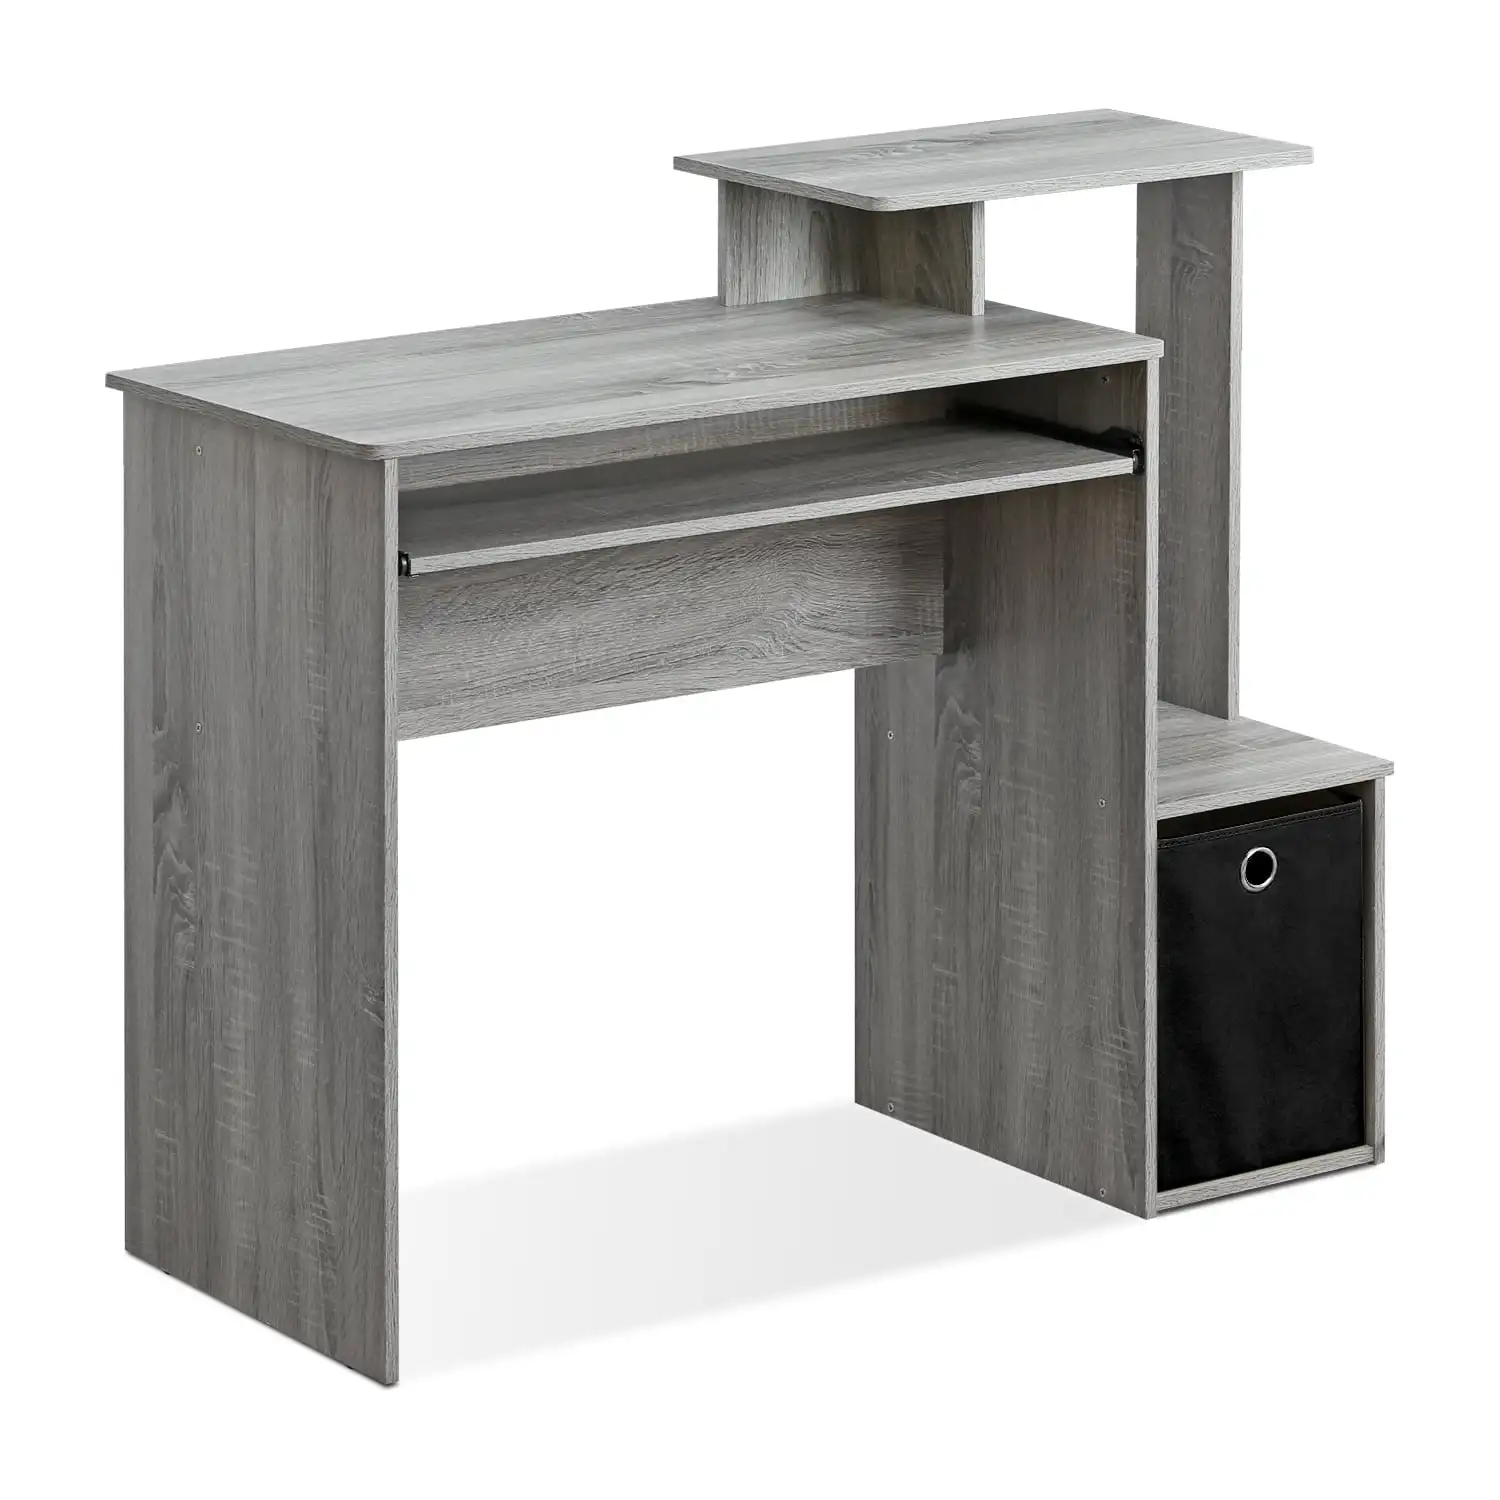 

Furinno Econ Multipurpose Home Office Computer Writing Desk with Bin, French Oak Grey, Keyboard Trays, CPU Storage, Drawer